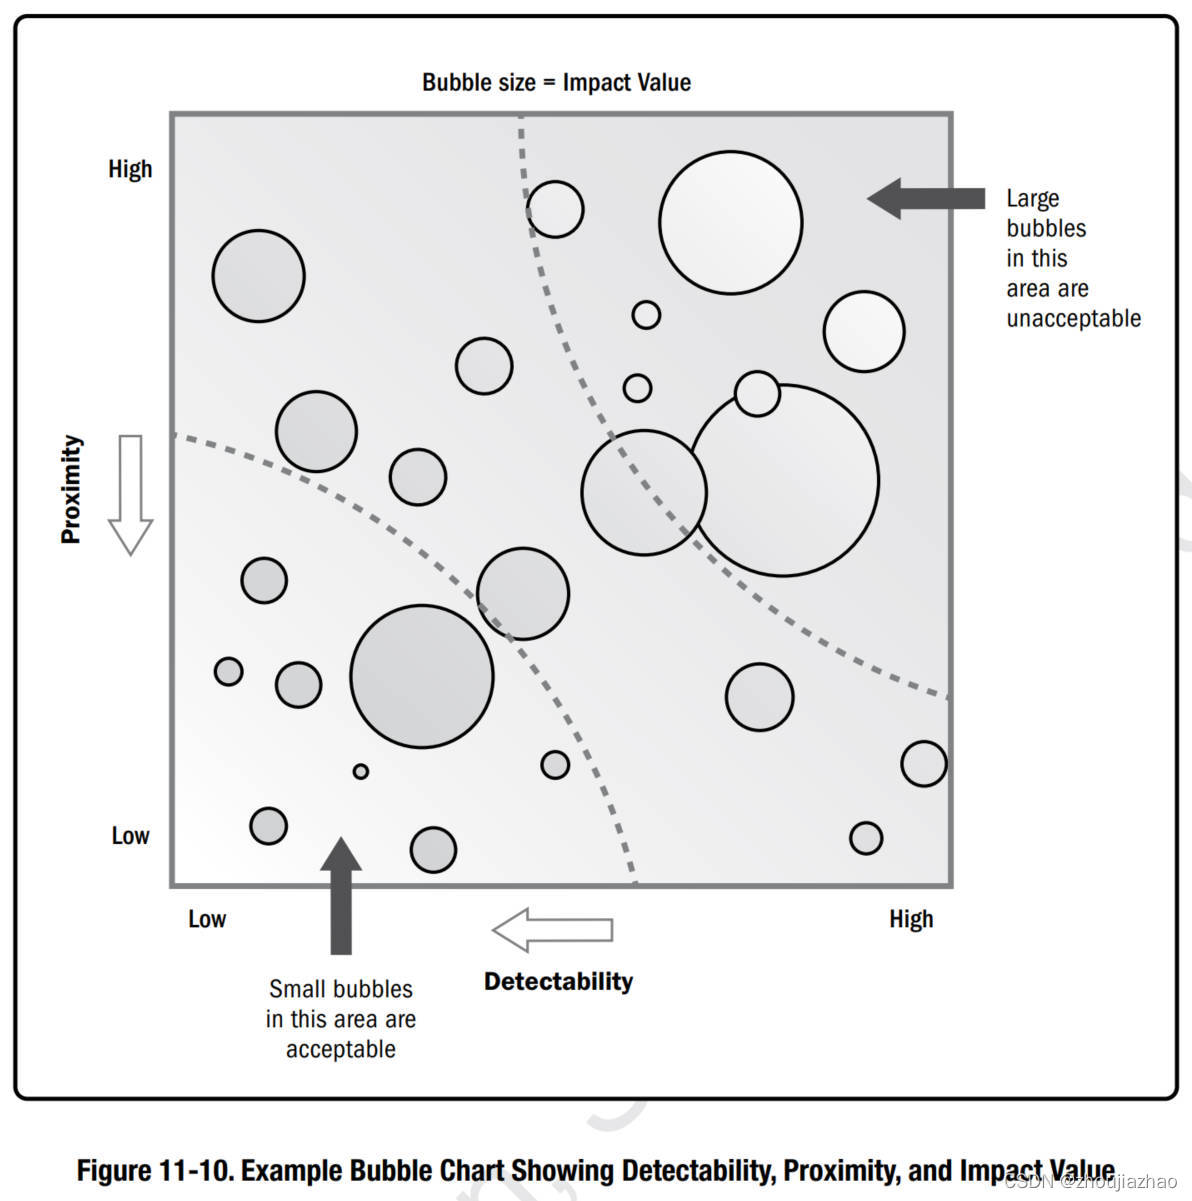 Example_Bubble_Chart_Showing_Detectability_Proximity_and_Impact_Value_EN